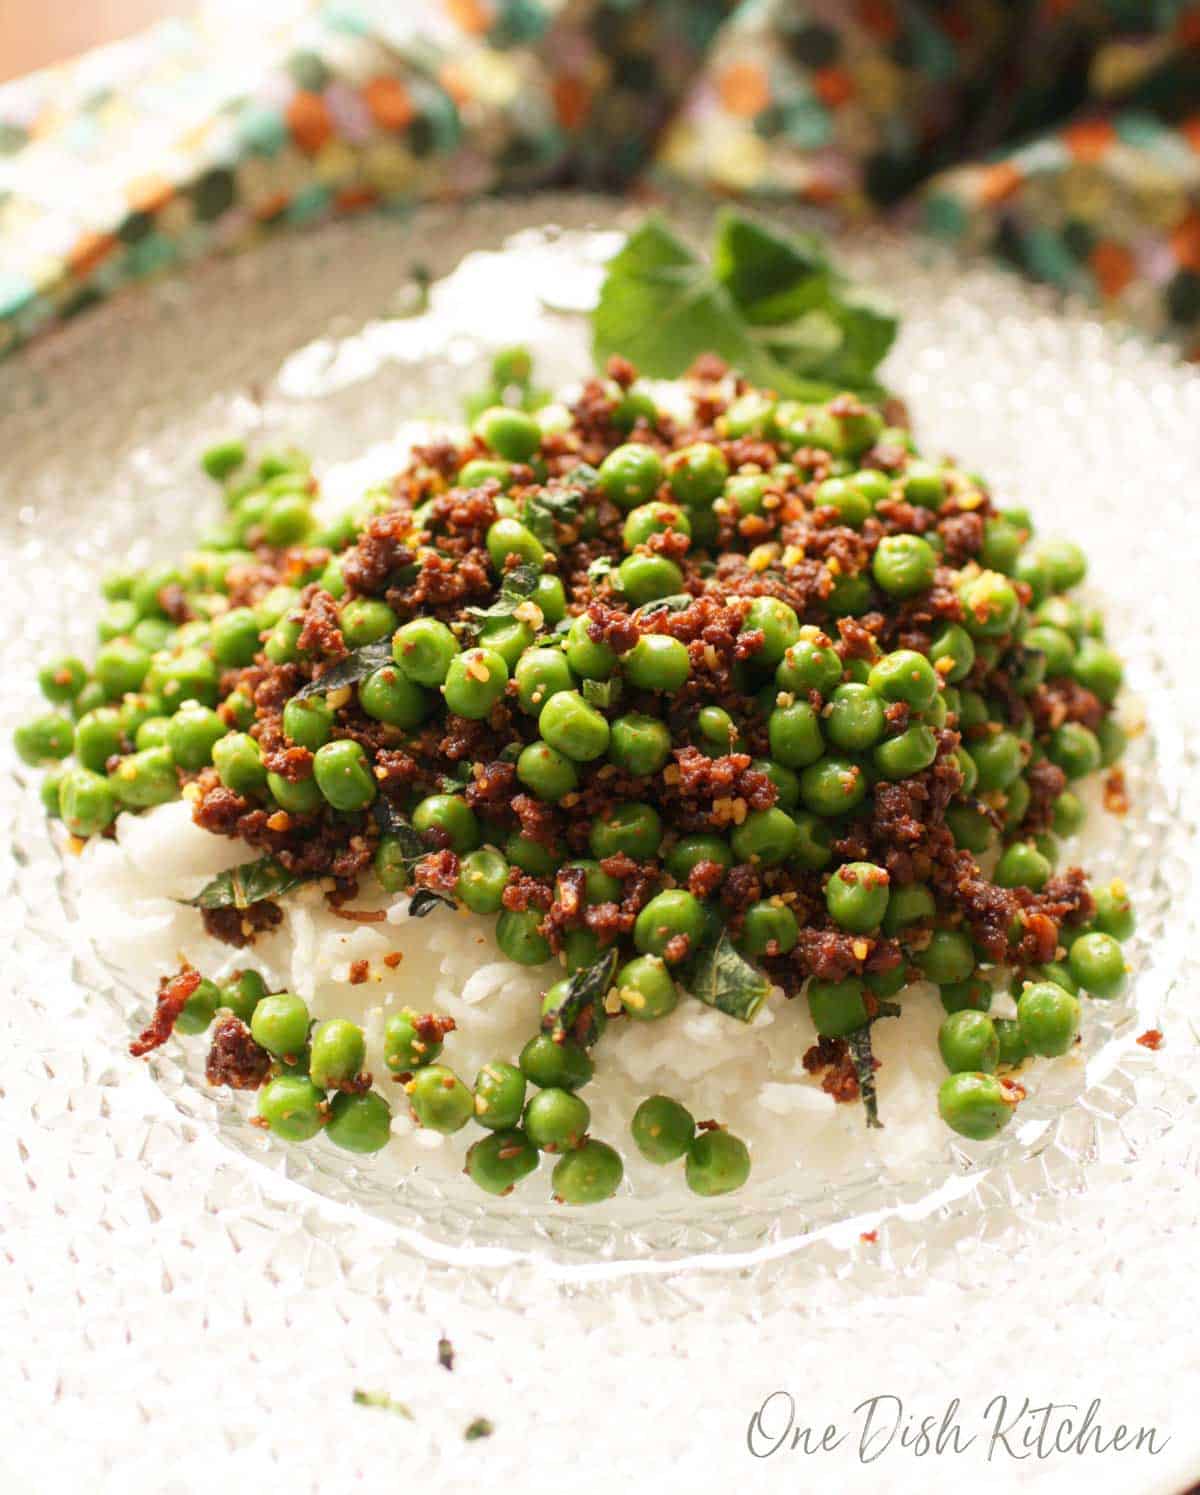 Spicy peas made with chorizo and served over white rice on a clear glass plate.